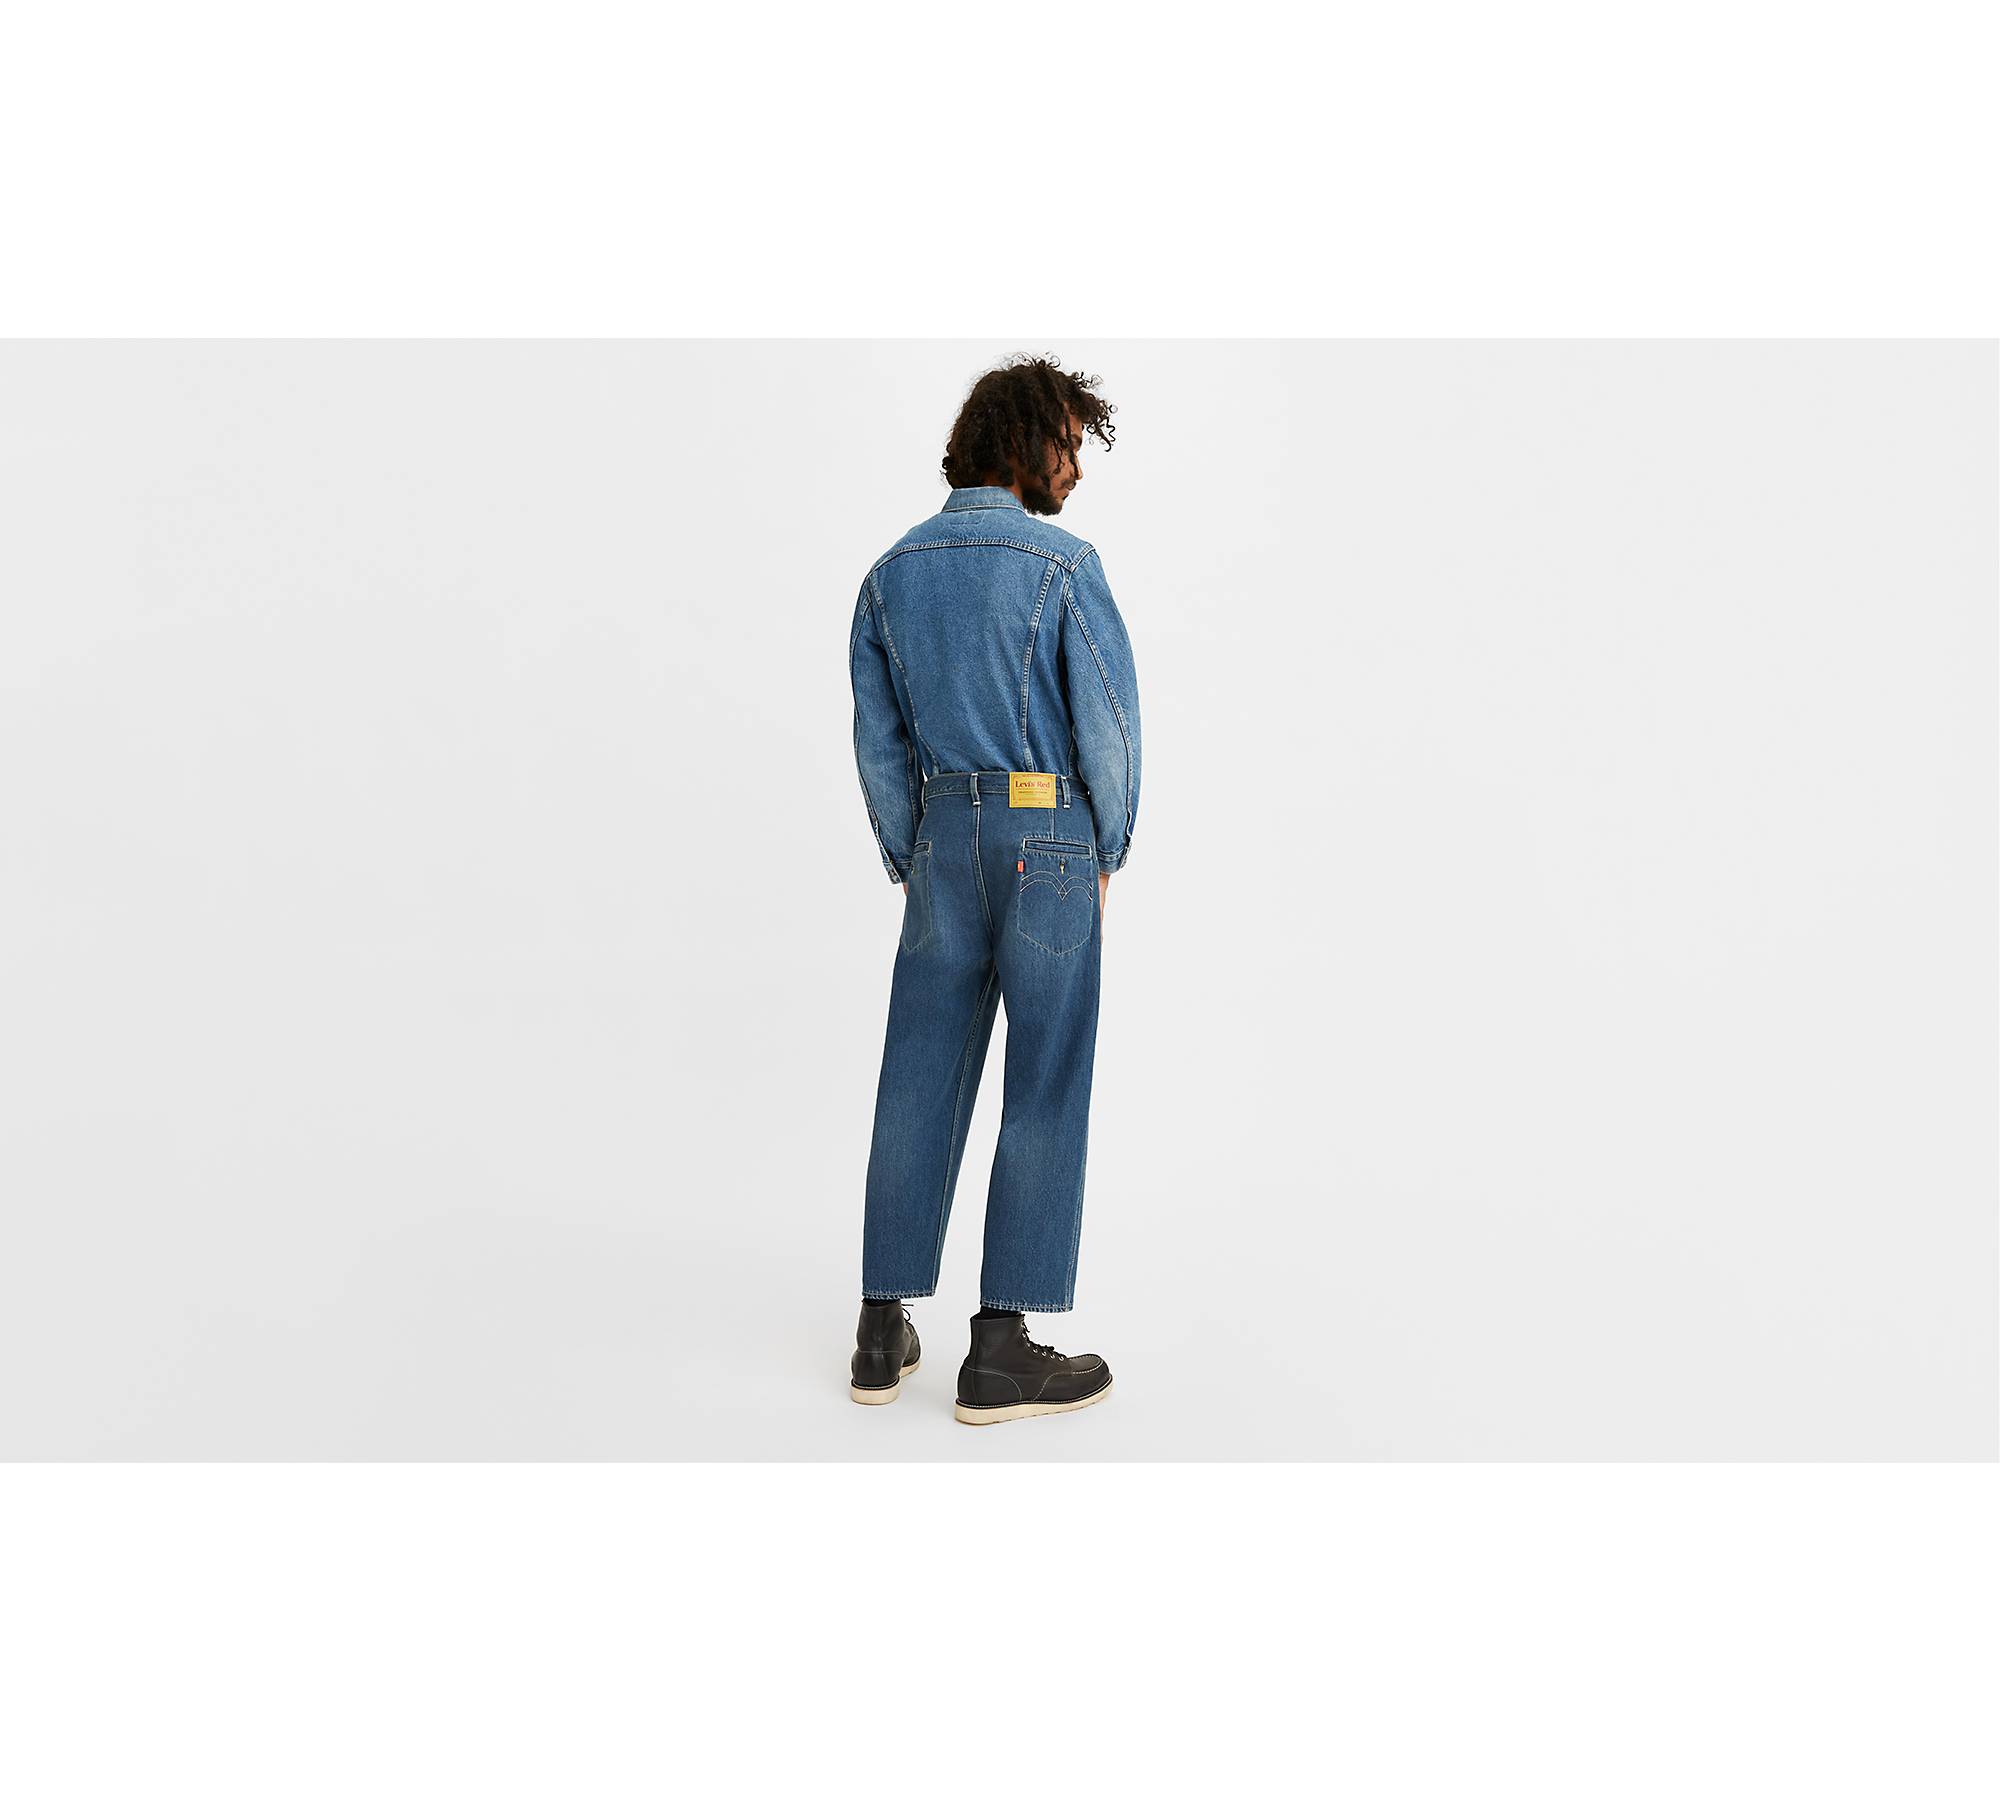 Levi's Tailor High Loose Taper Pant Incense 36317-0002 - Free